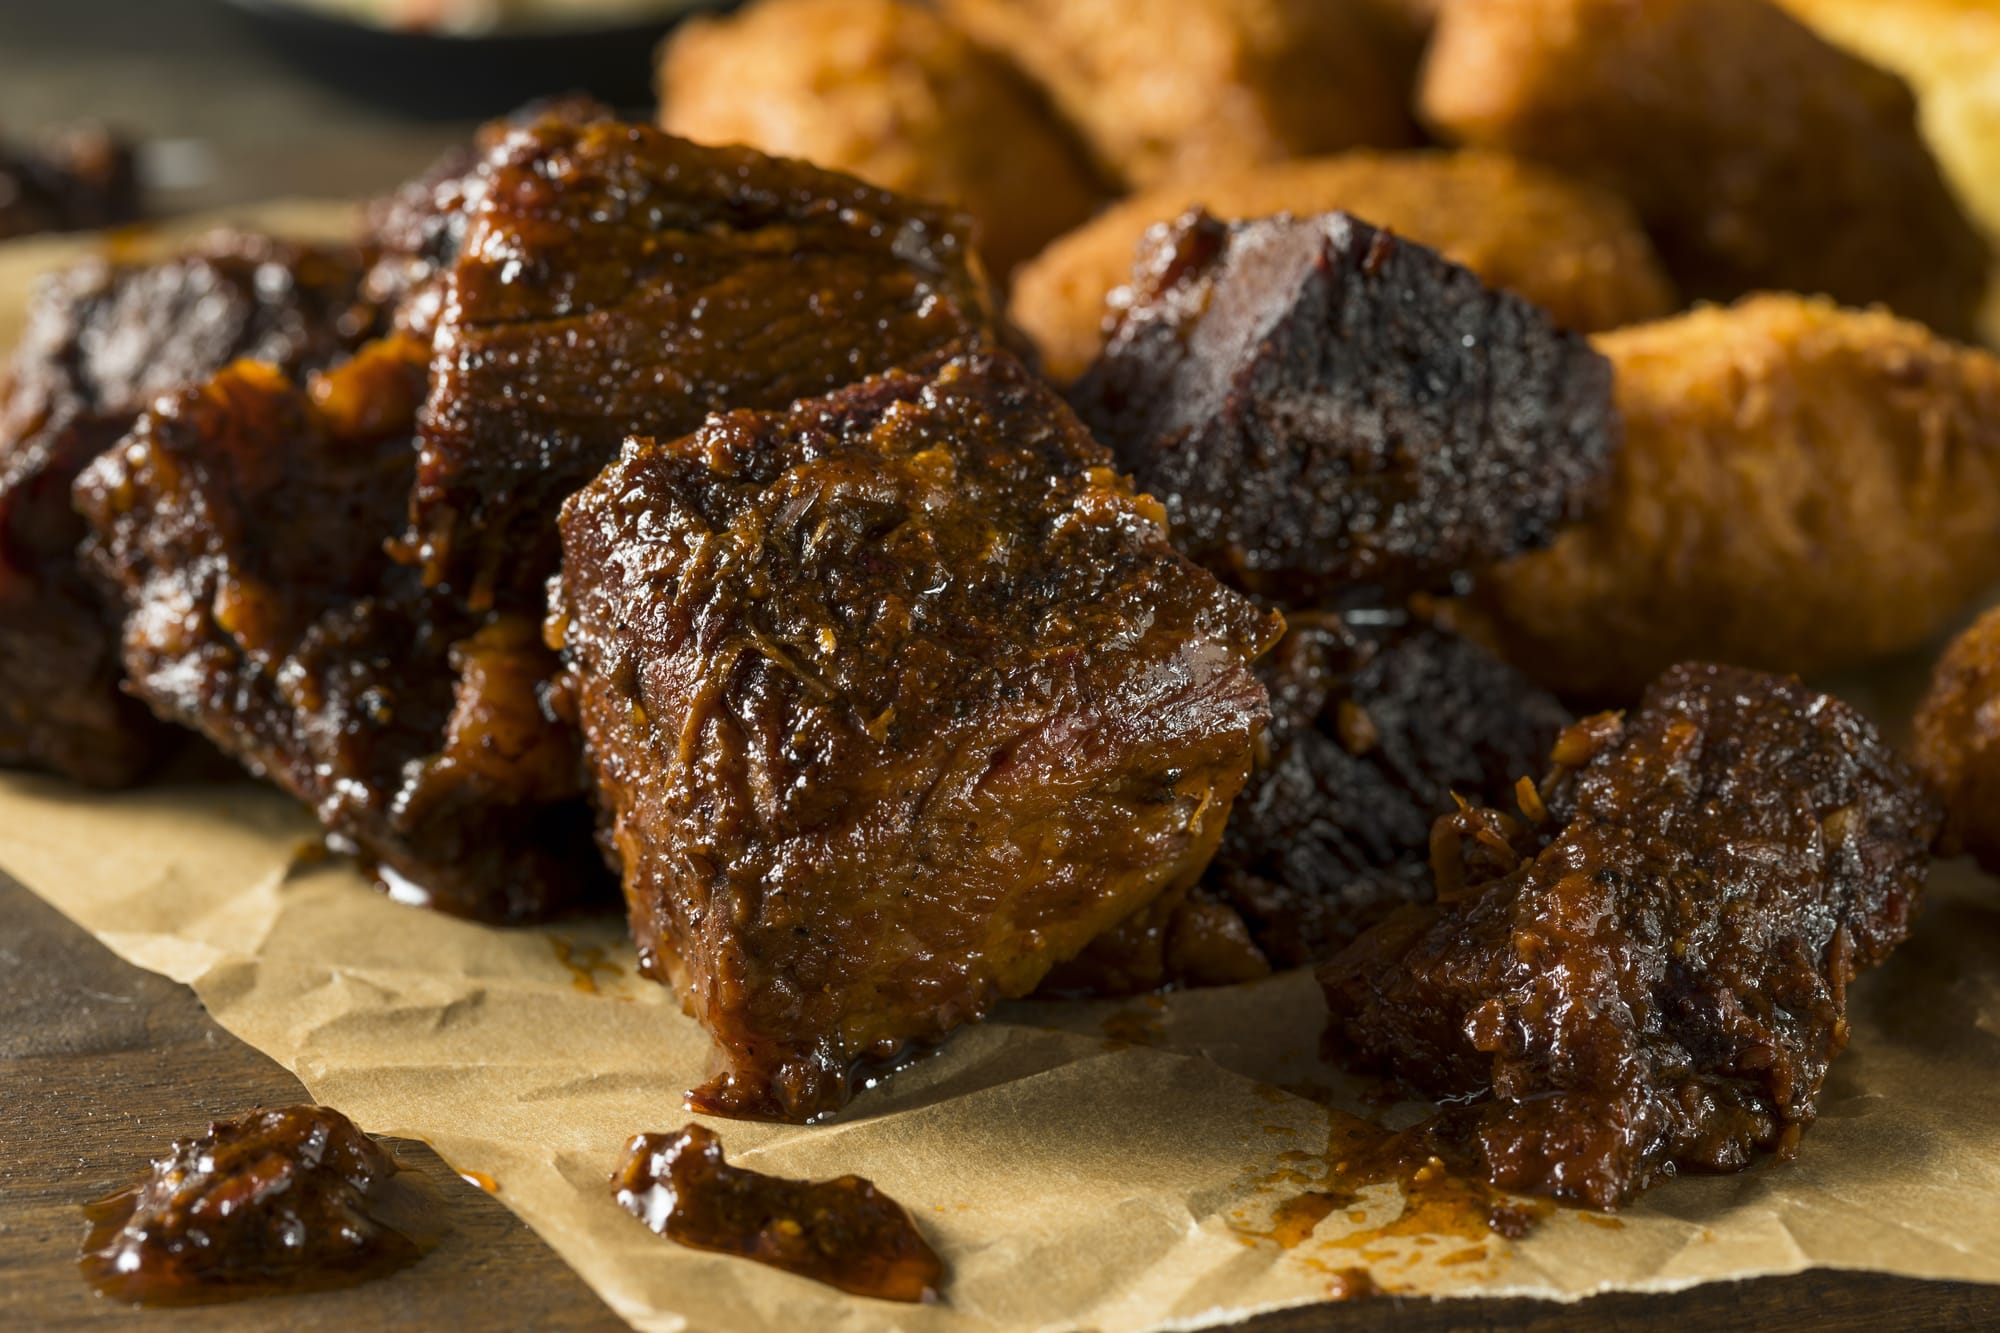 What are burnt ends